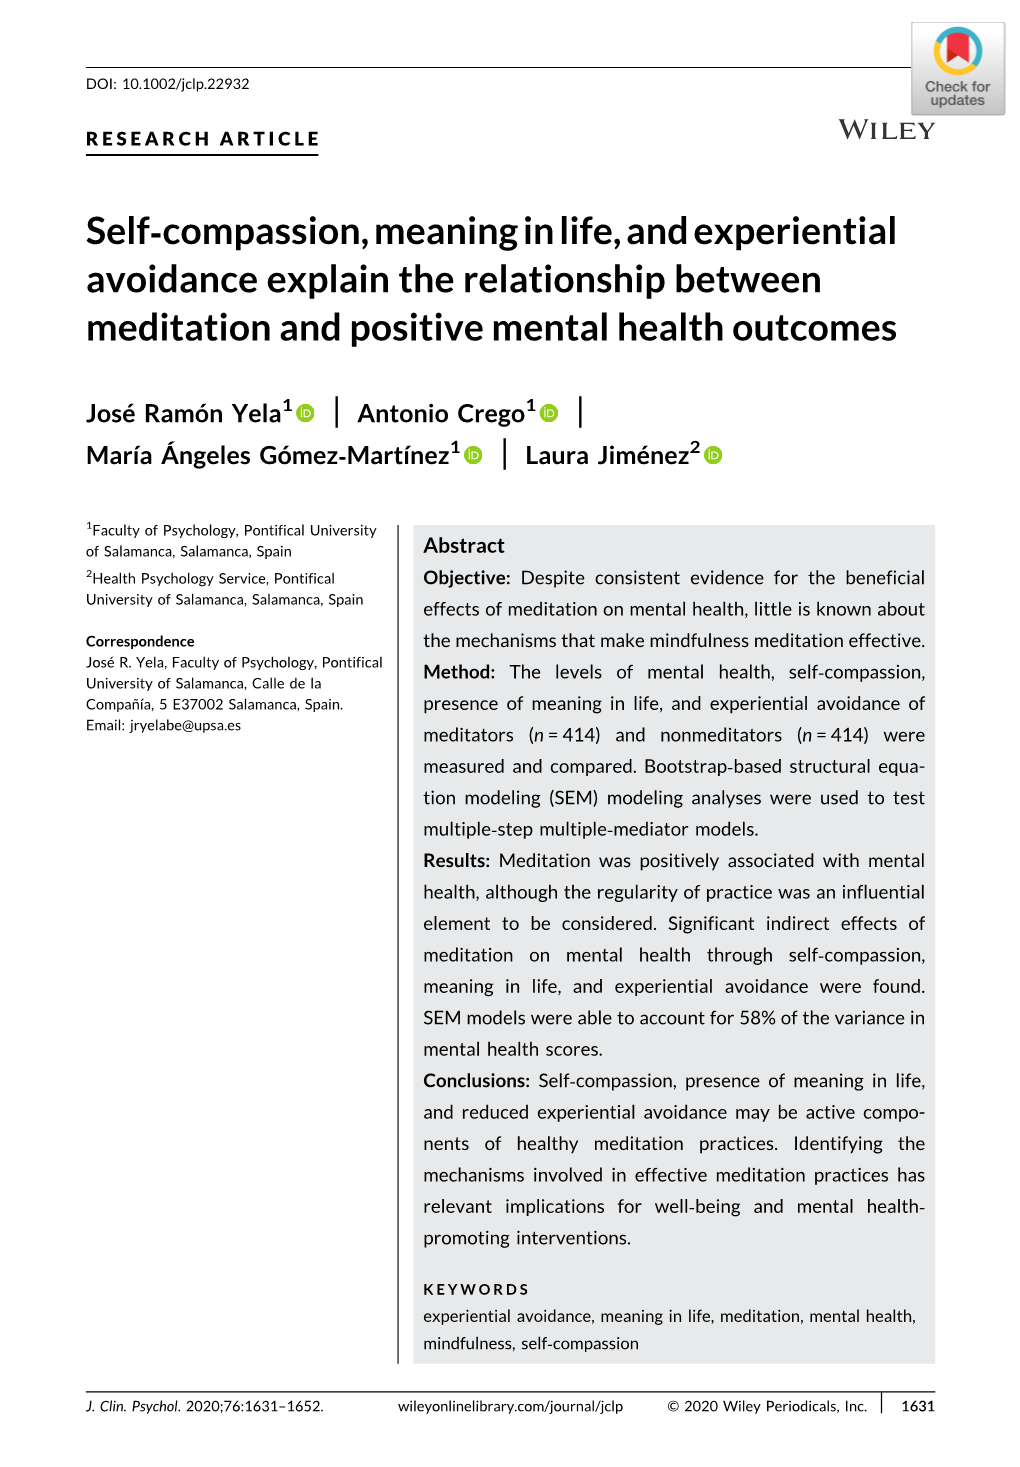 Self‐Compassion, Meaning in Life, and Experiential Avoidance Explain the Relationship Between Meditation and Positive Mental Health Outcomes